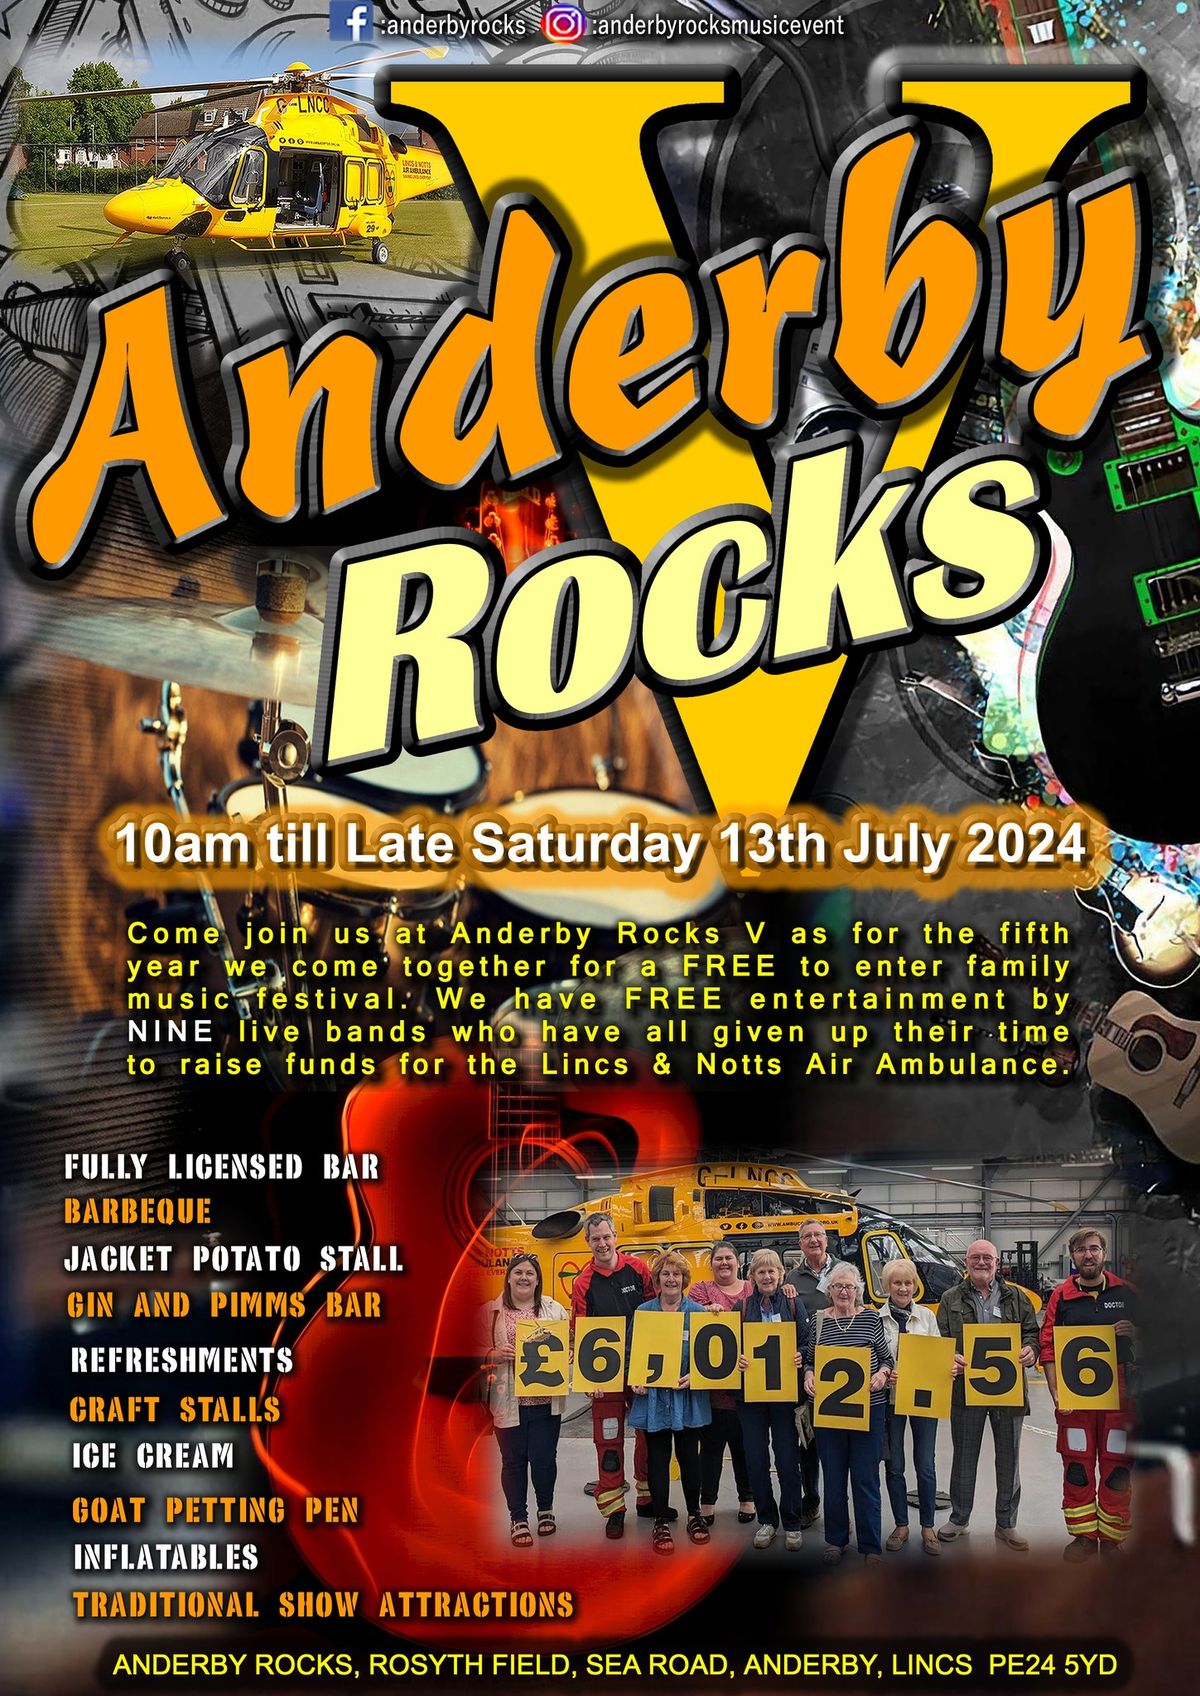 Anderby Rocks V - A FREE Family Music Event